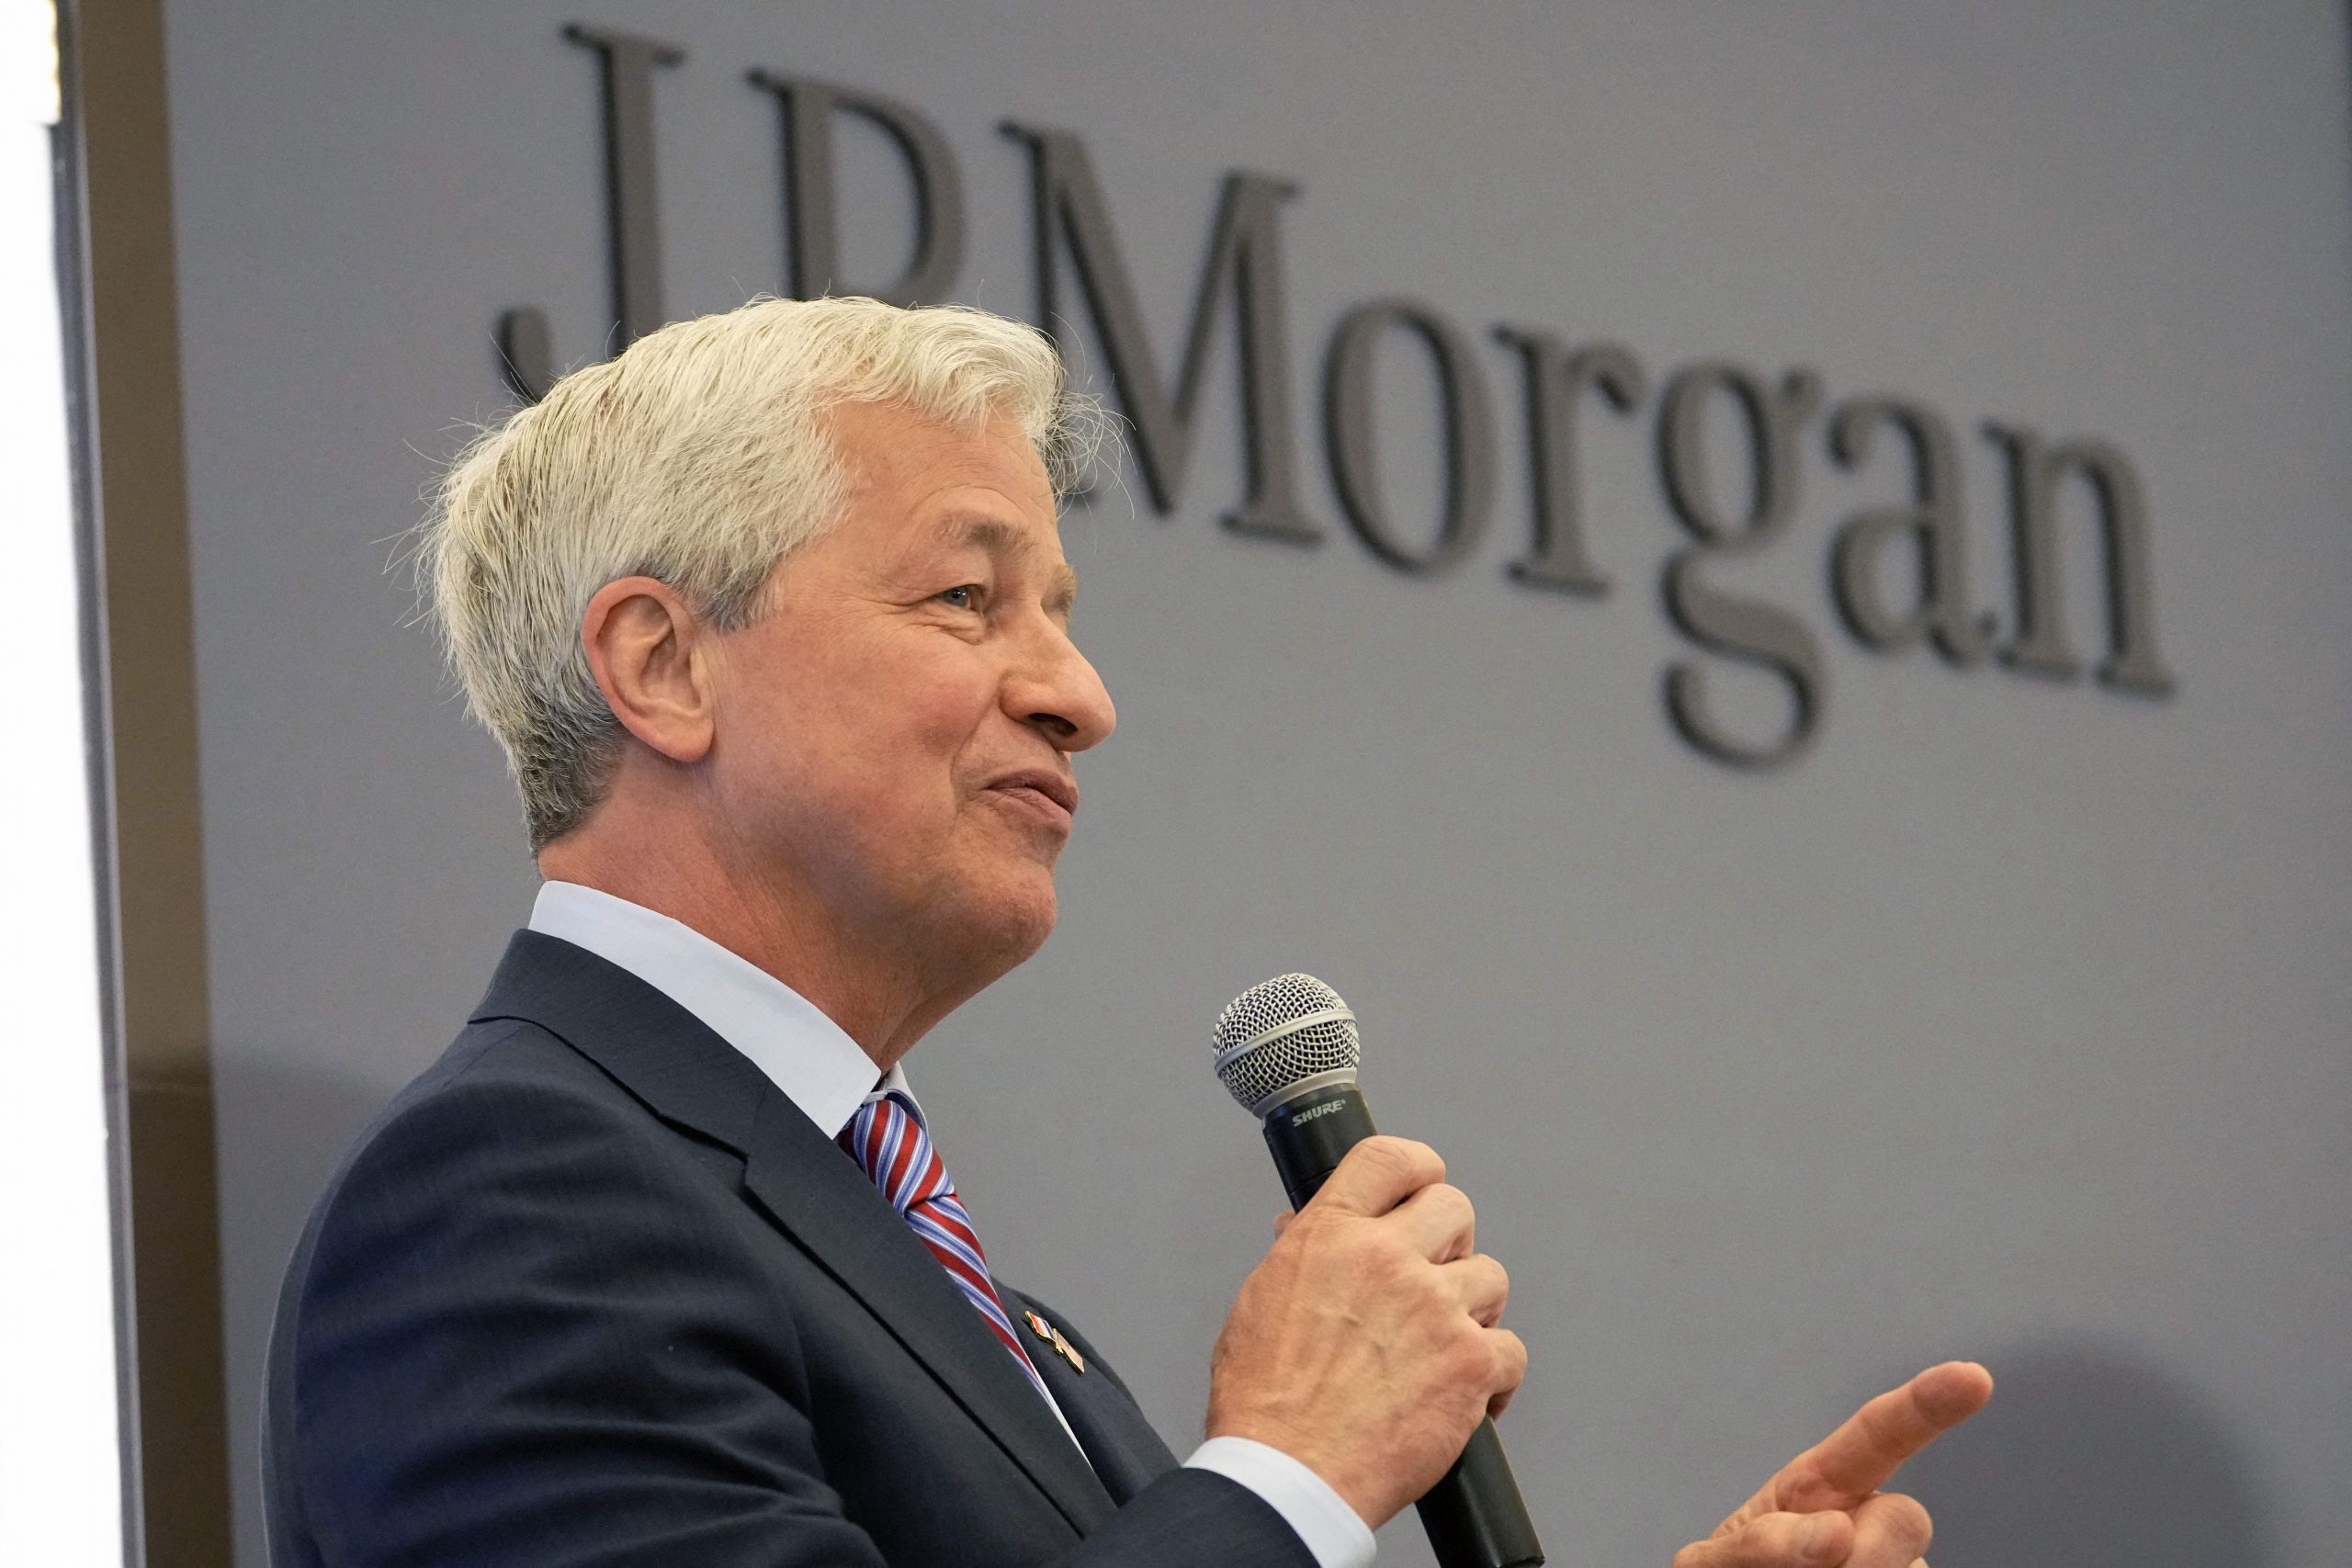 JPMorgan project will push bank further into market serving private firms